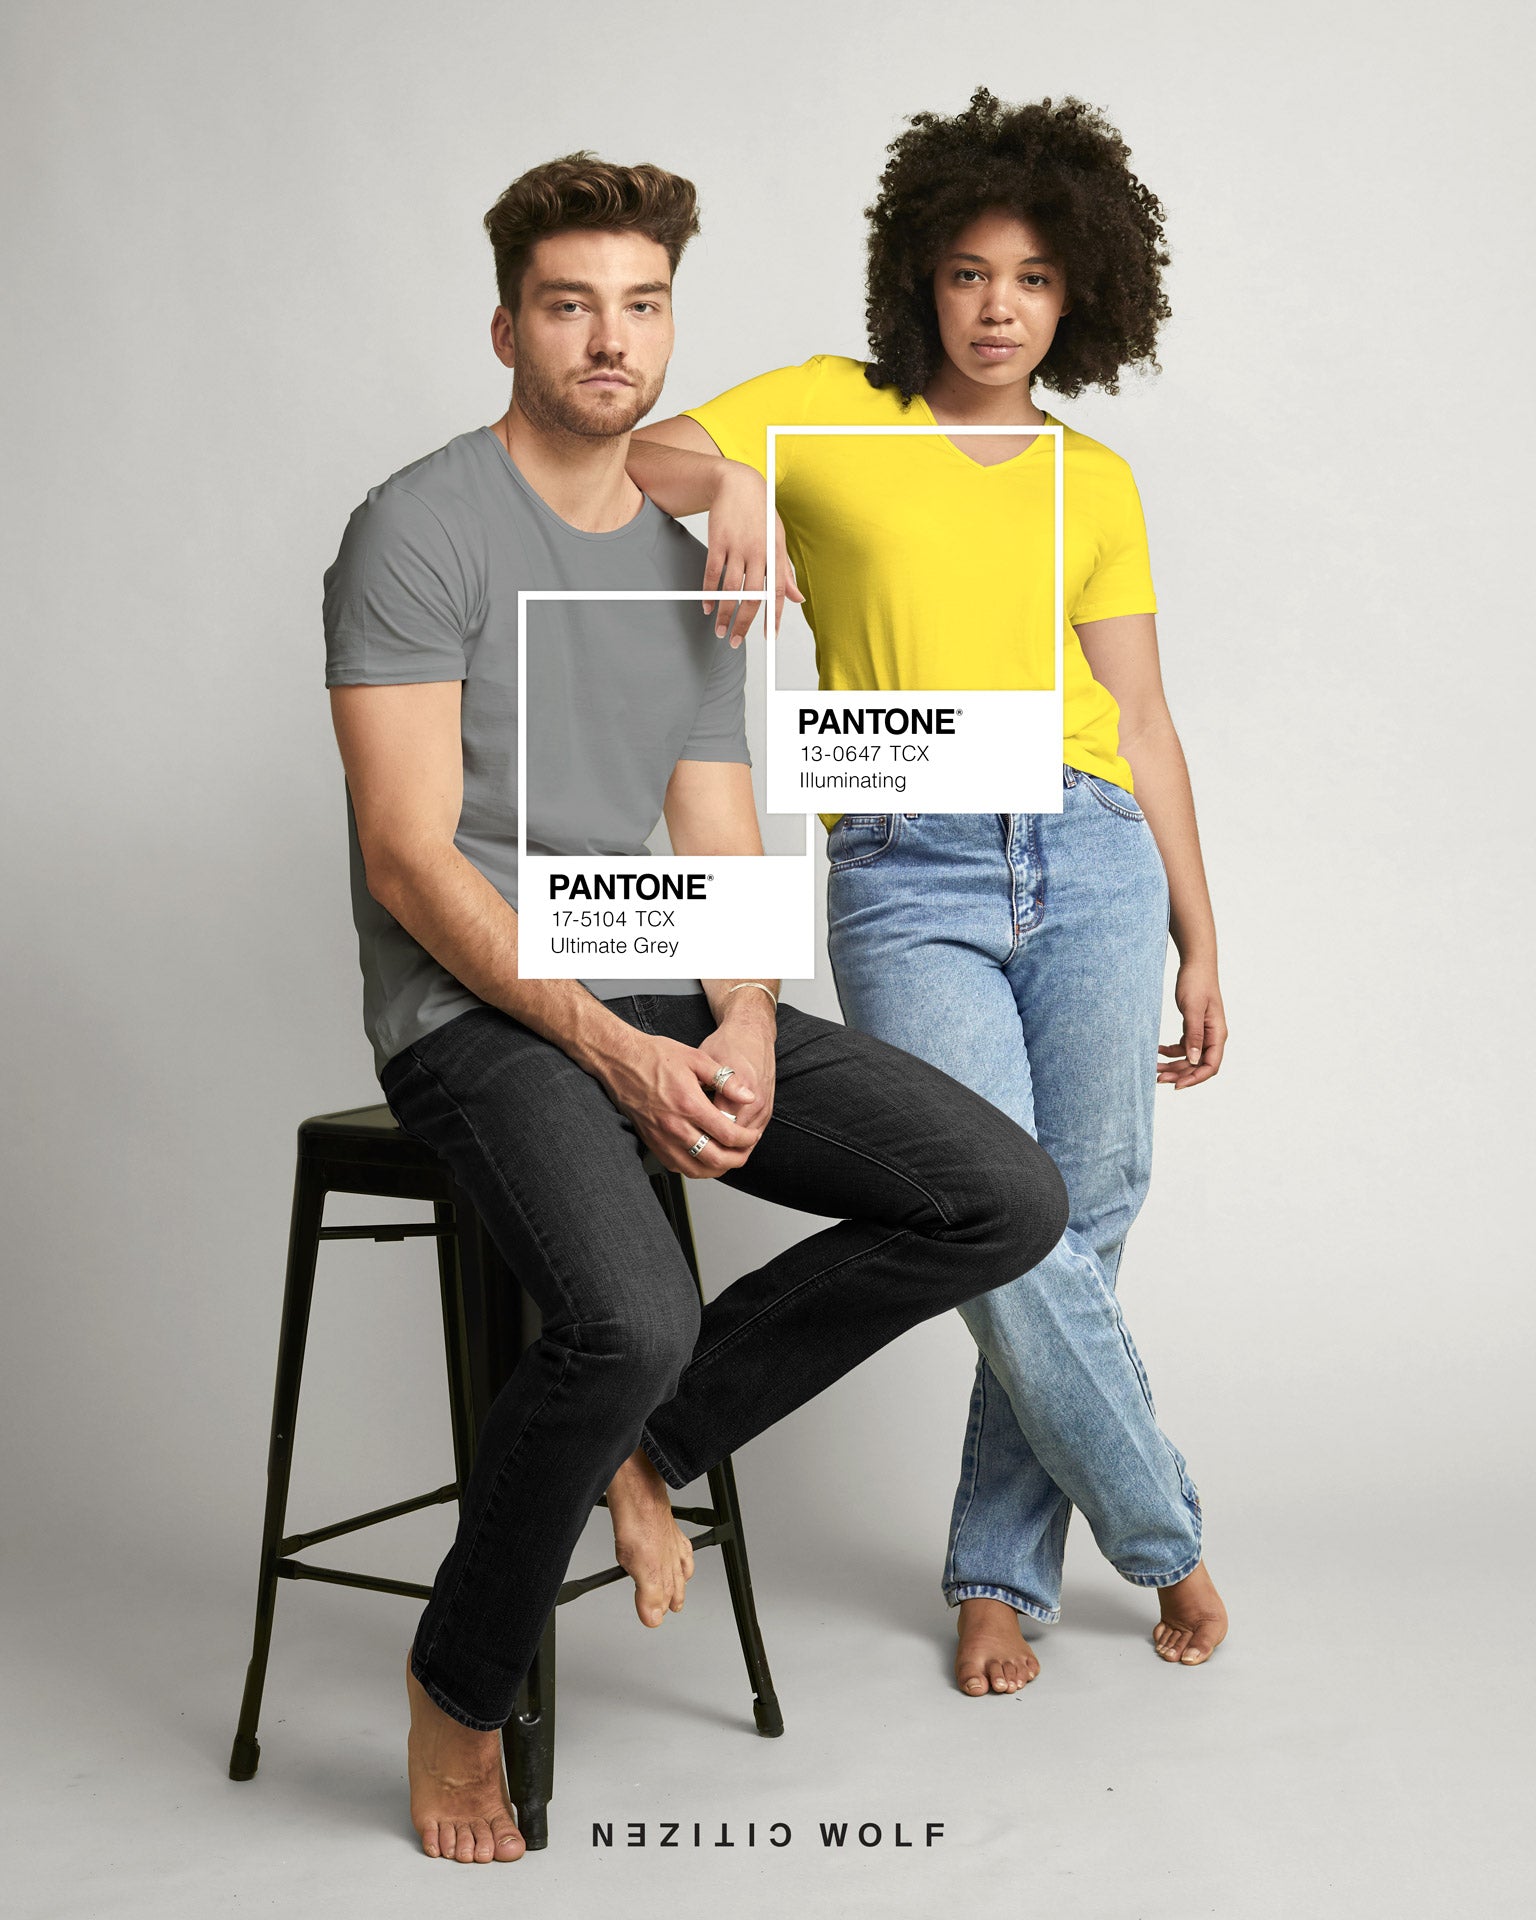 Citizen Wolf x Pantone COTY21 - Ultimate Grey & Illuminating Yellow Tshirts for him and her